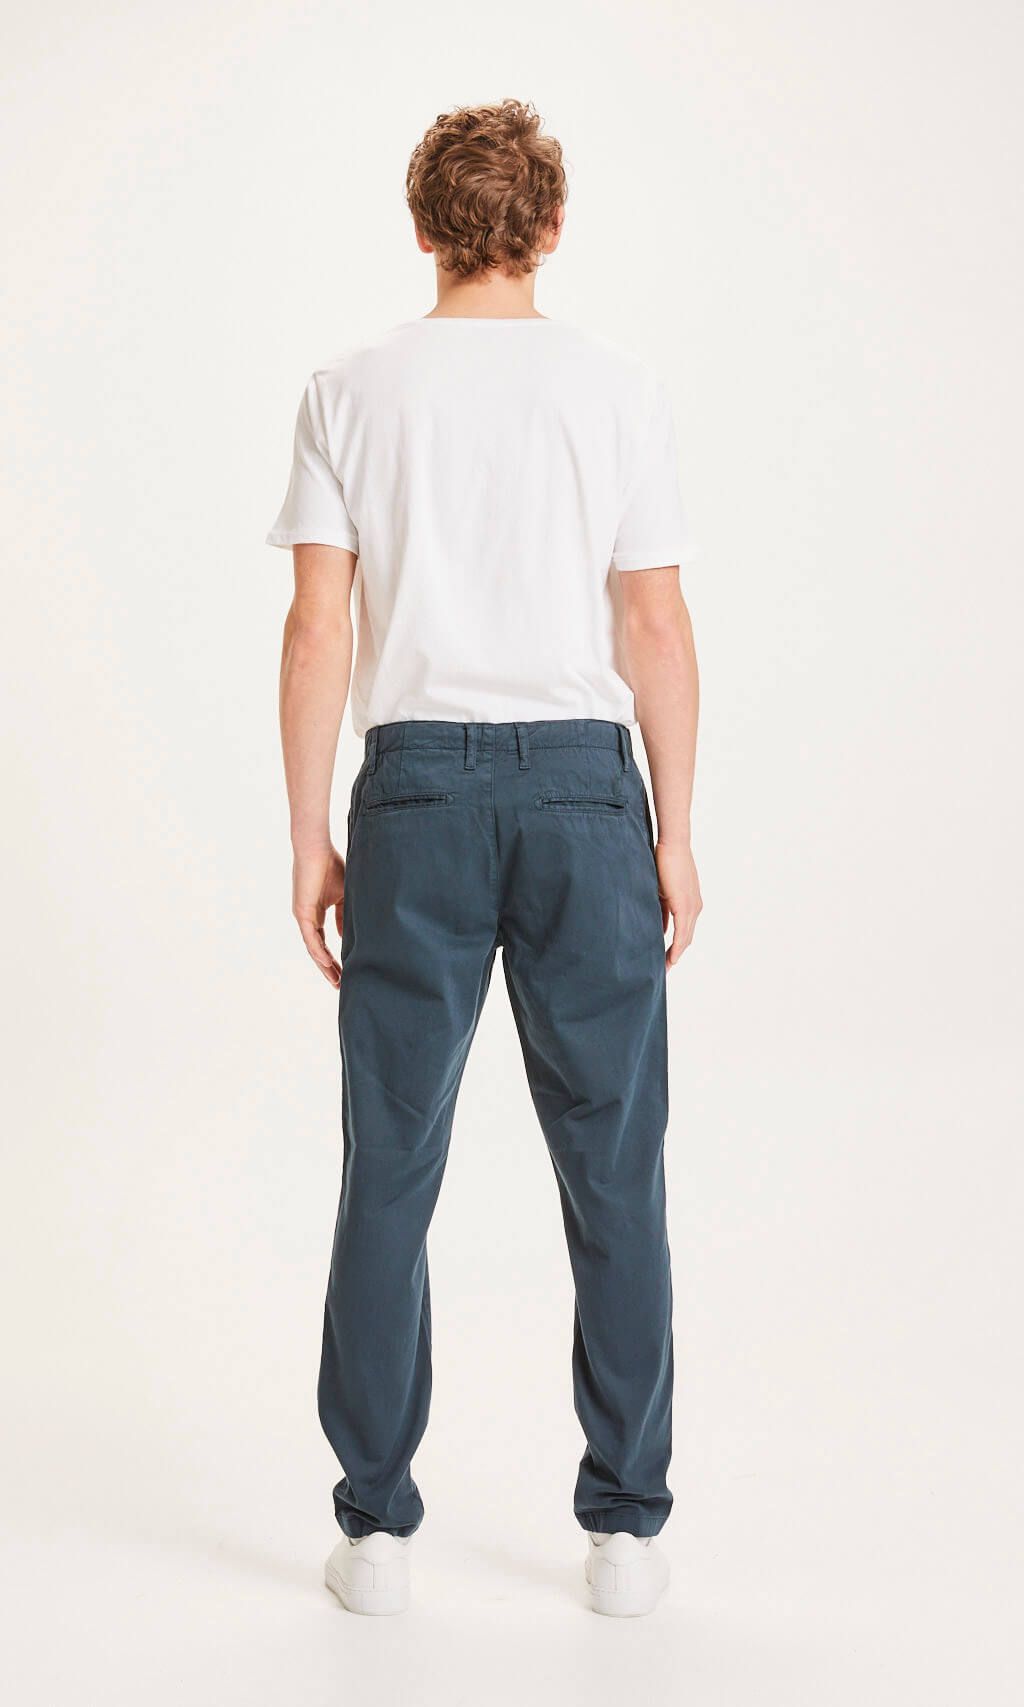 Chuck Regular Stretched Chino Pant Total Eclipse 33/32